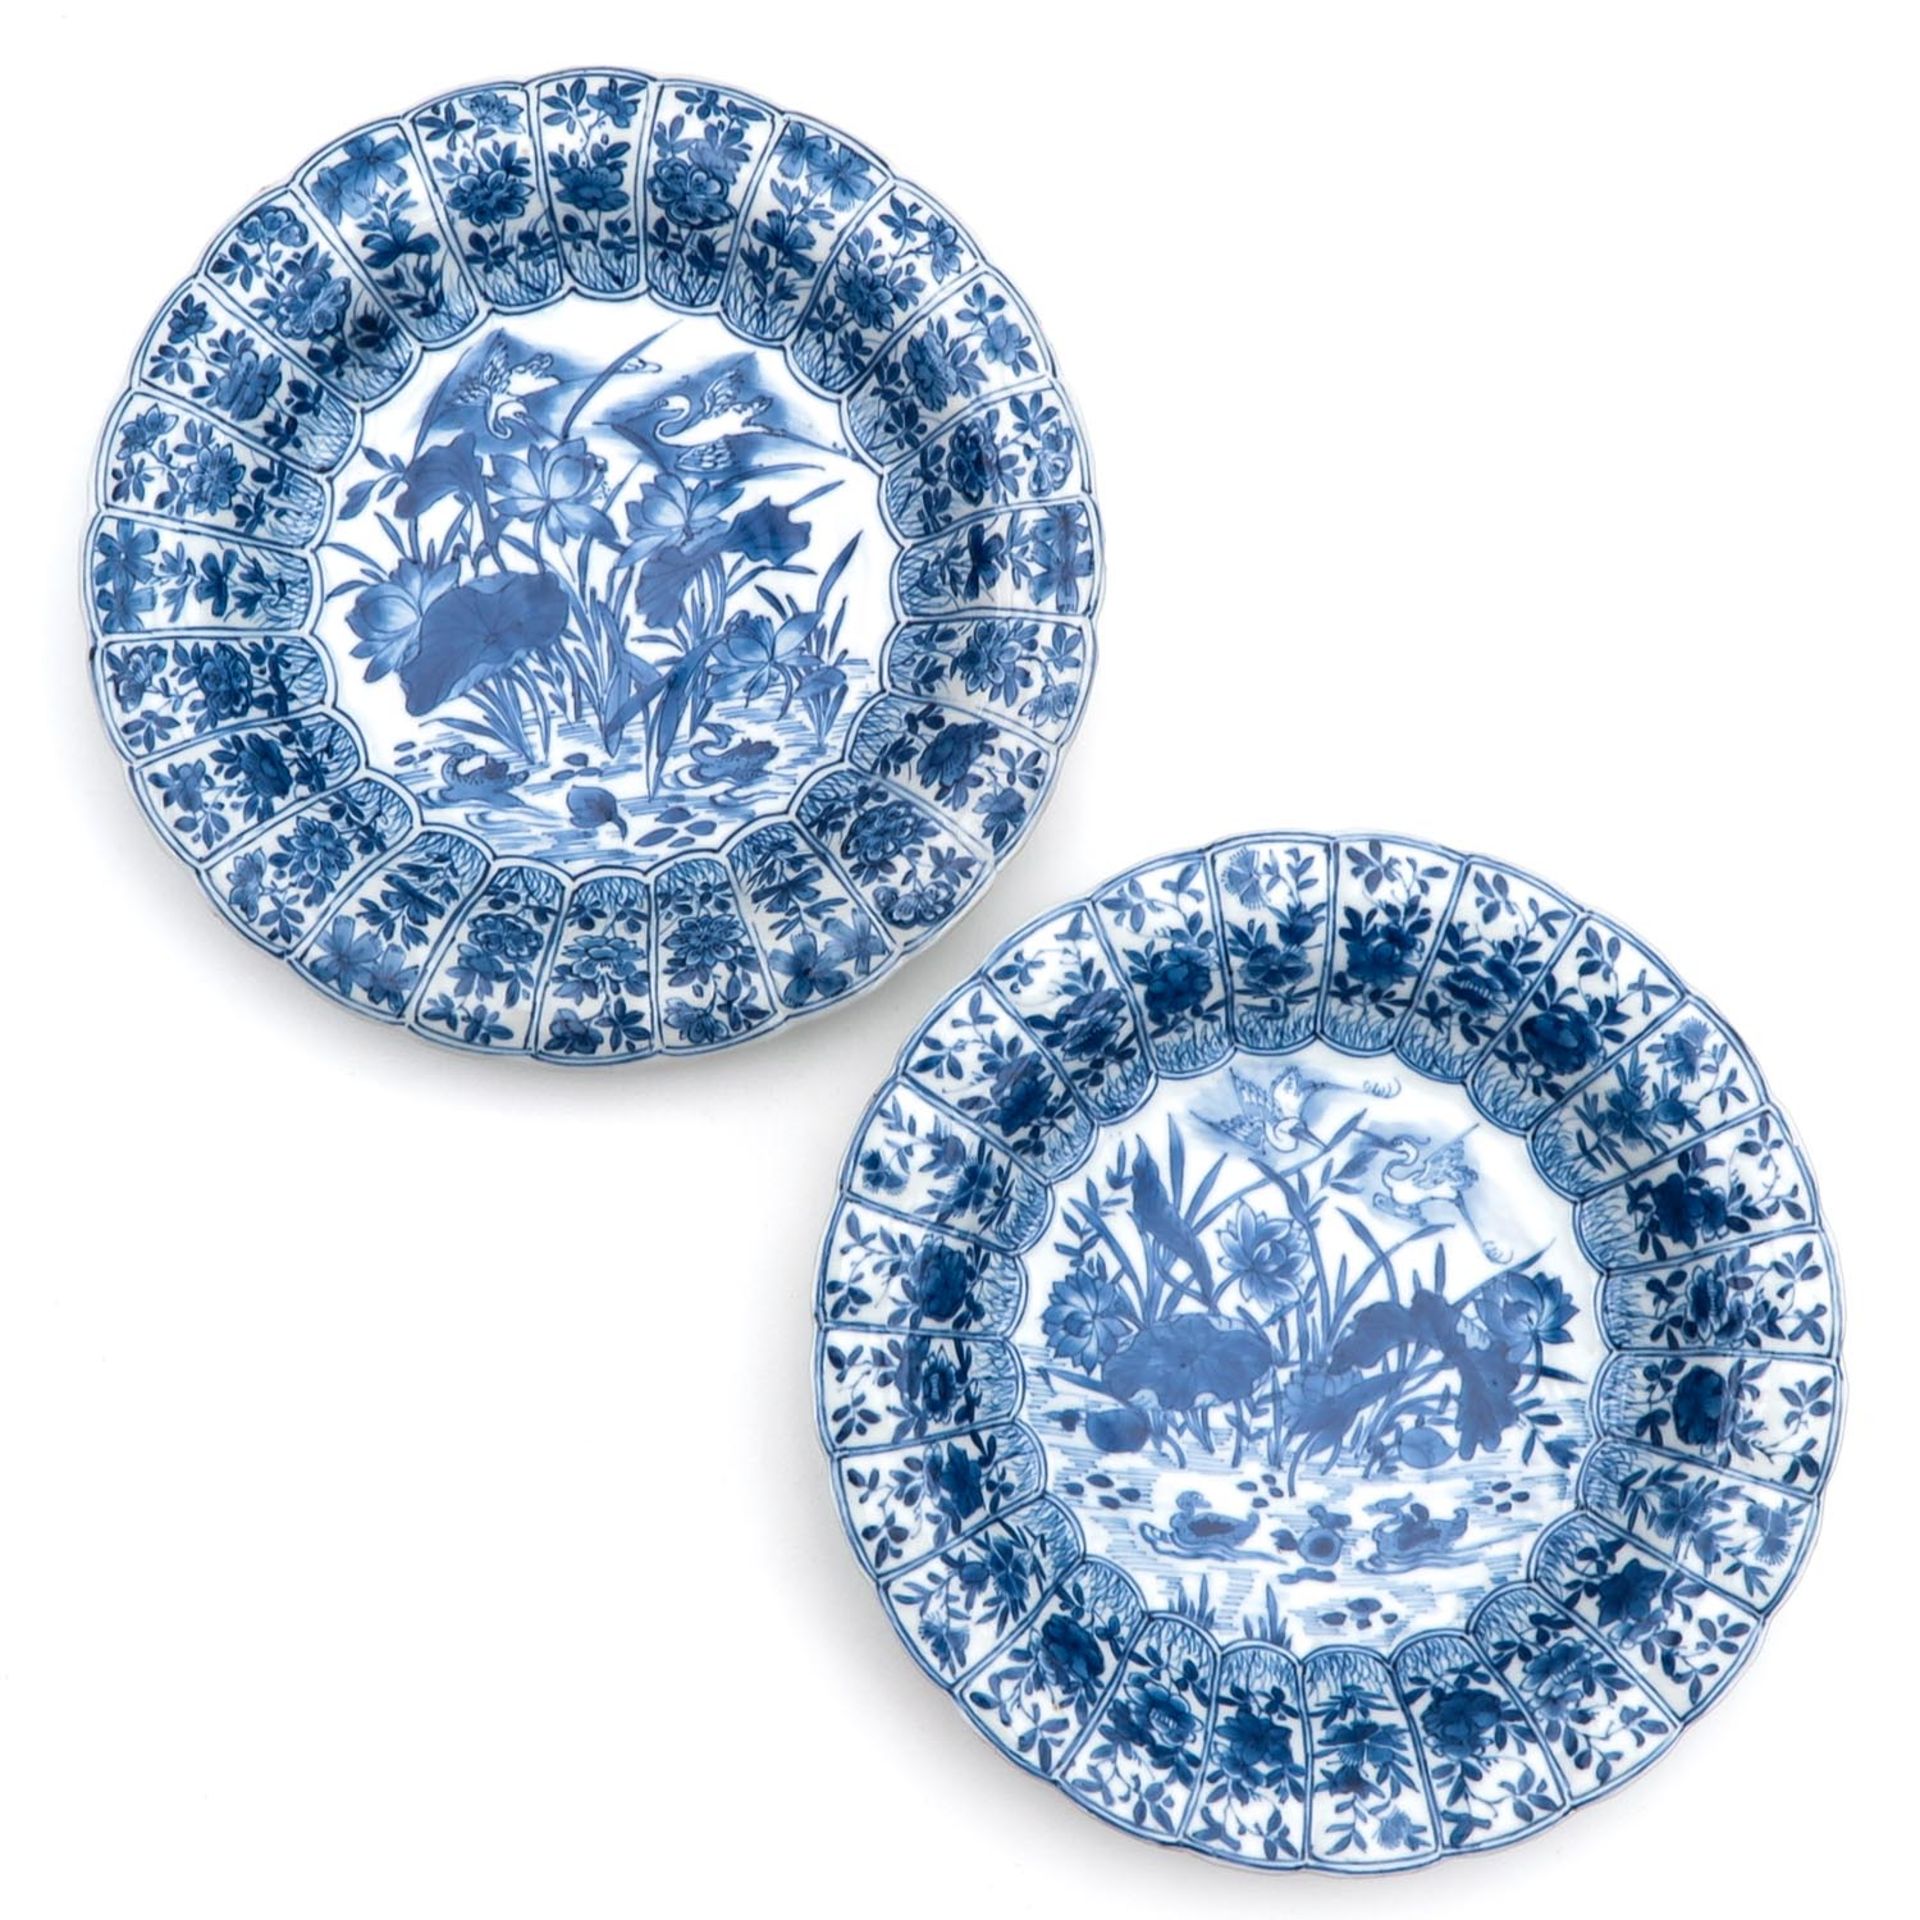 A Series of 4 Blue and White Plates - Image 5 of 9